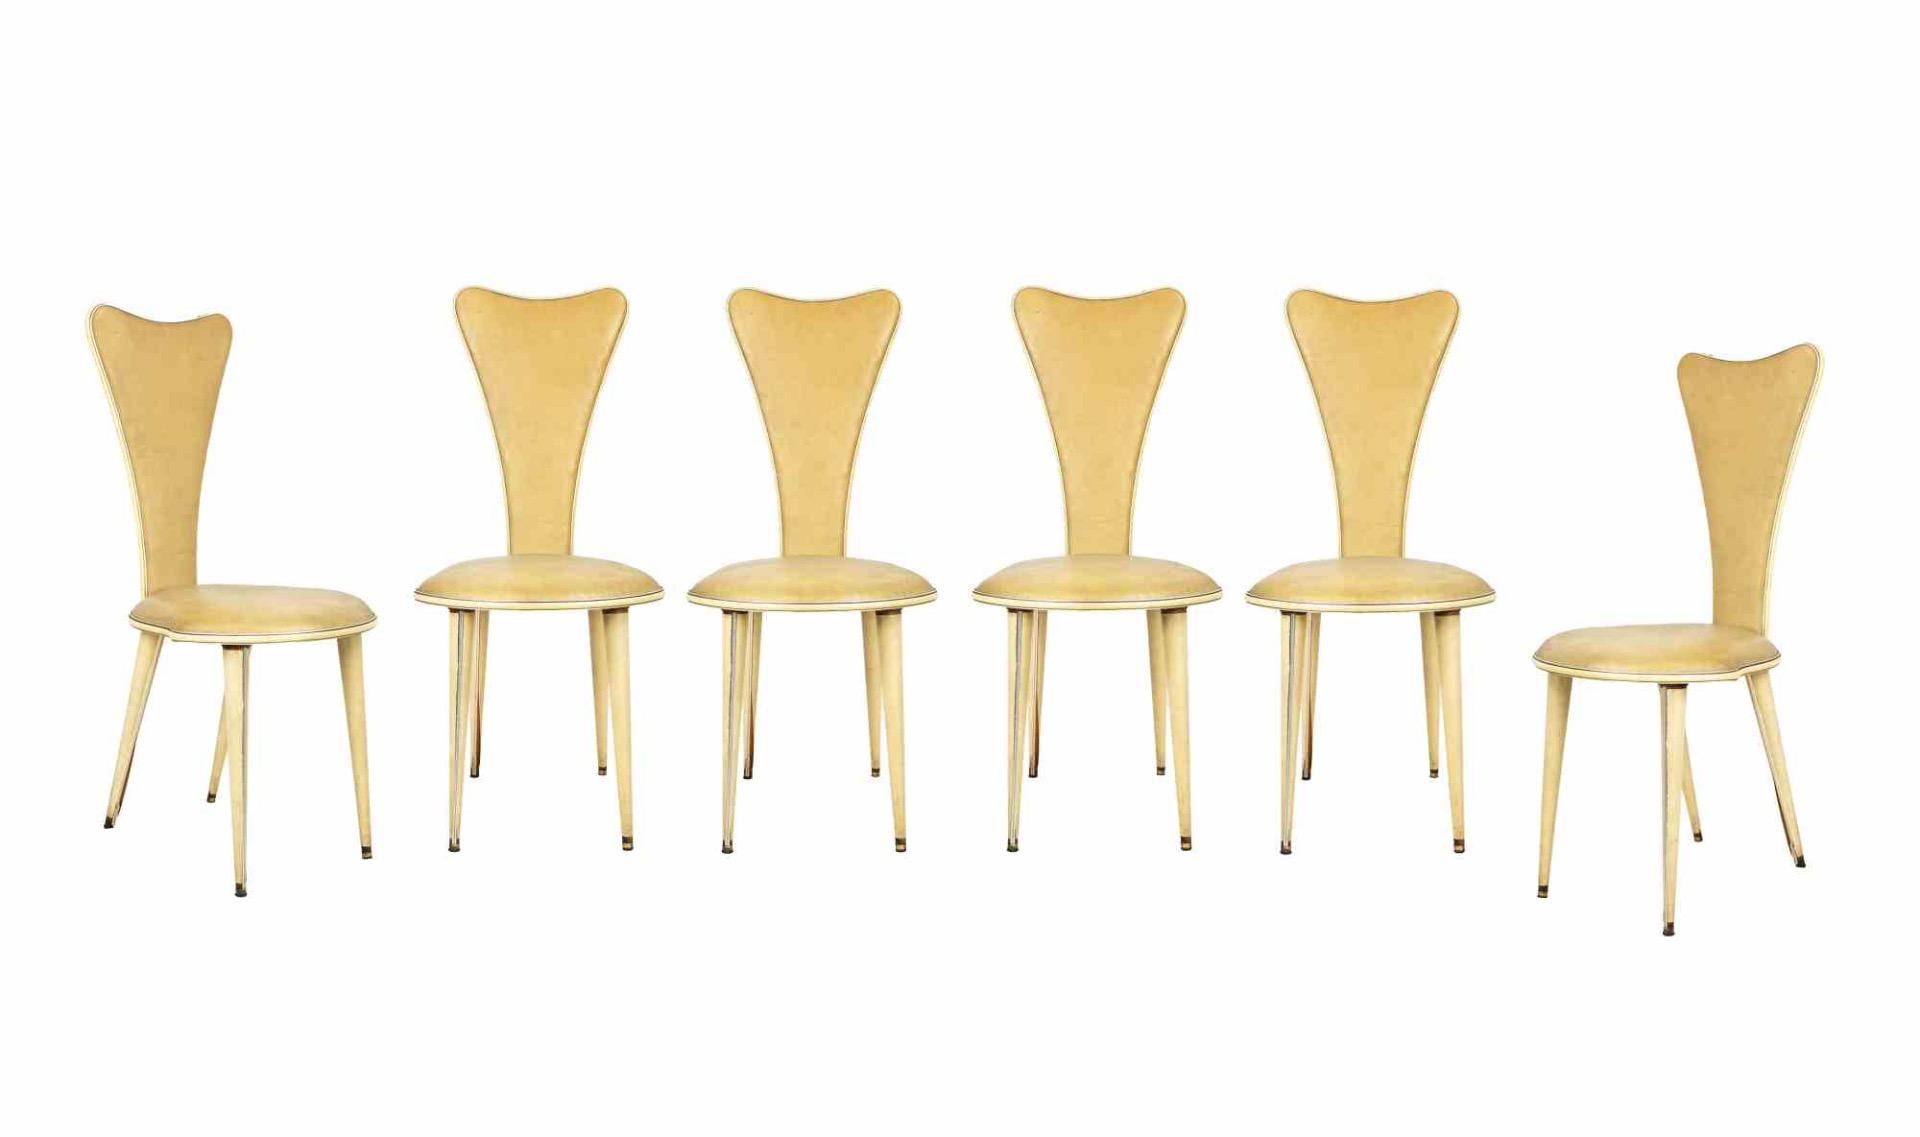 Dining table and set of six chairs is an original design furniture realized by Umberto Mascagni in the 1950s.

The set is composed by a dining table with six chairs.

Made in Italy

Wooden frame, white colored leatherette upholstery, brass